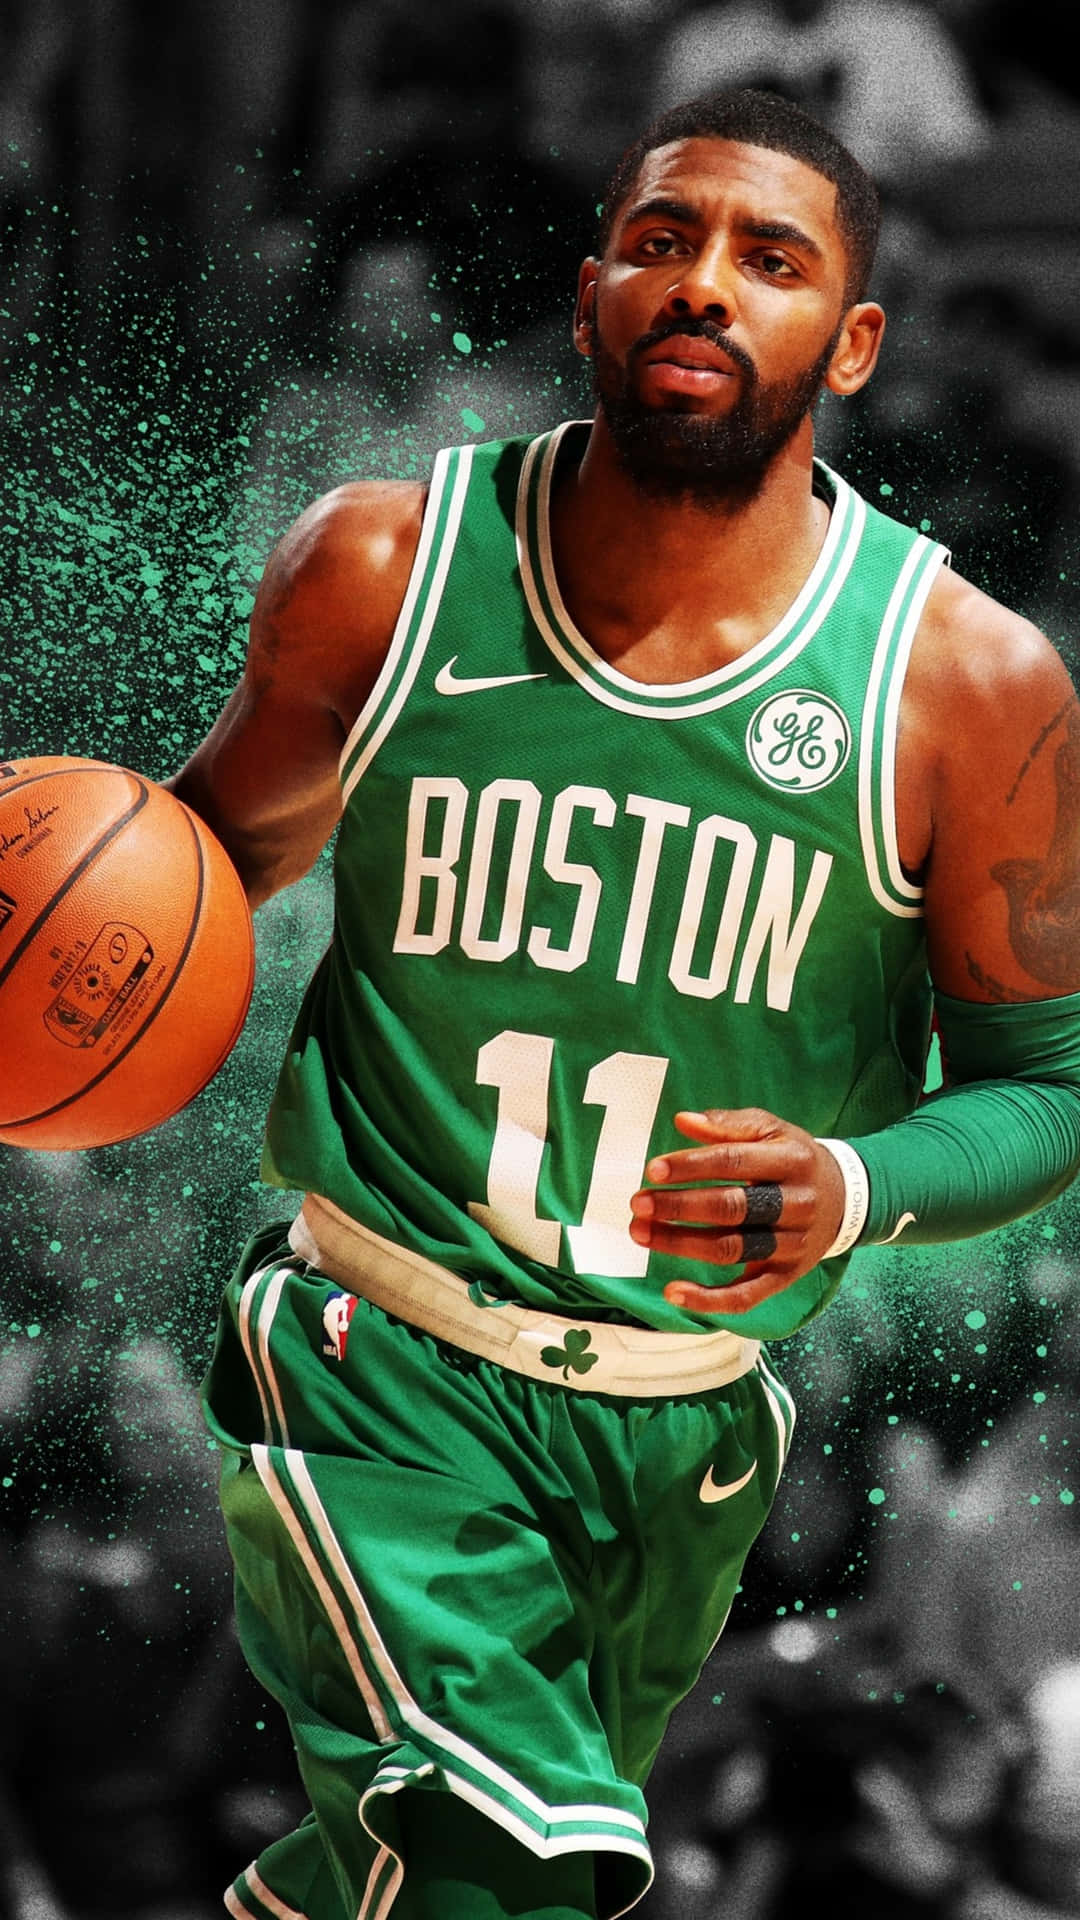 Cool Kyrie Irving Taking a Jump Shot Wallpaper